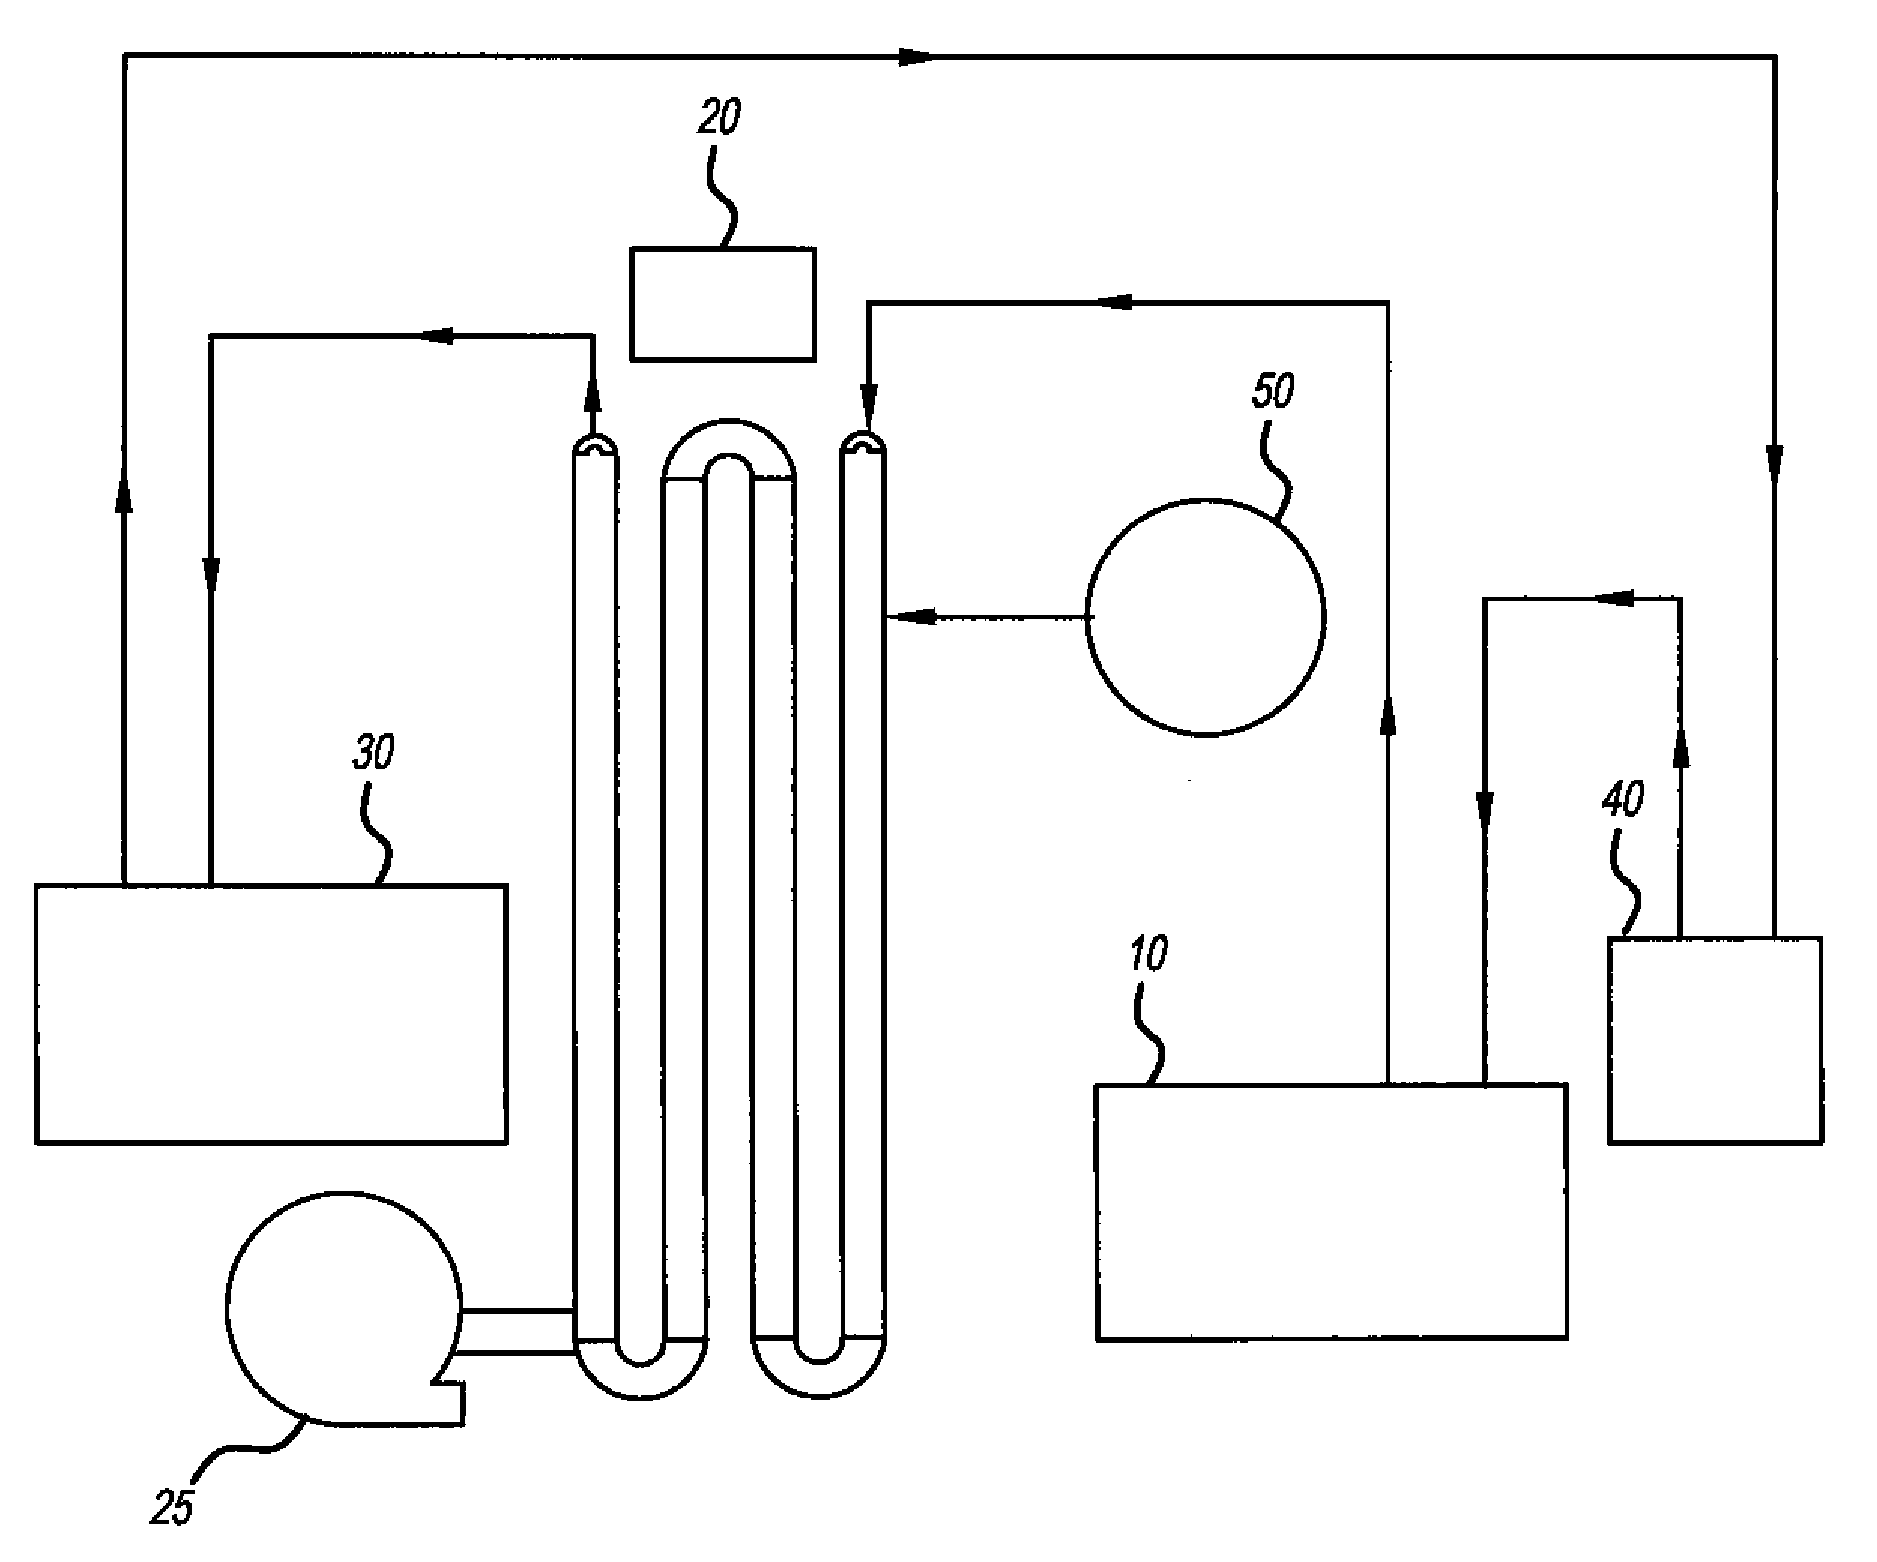 Polymer-containing solvent purifying process